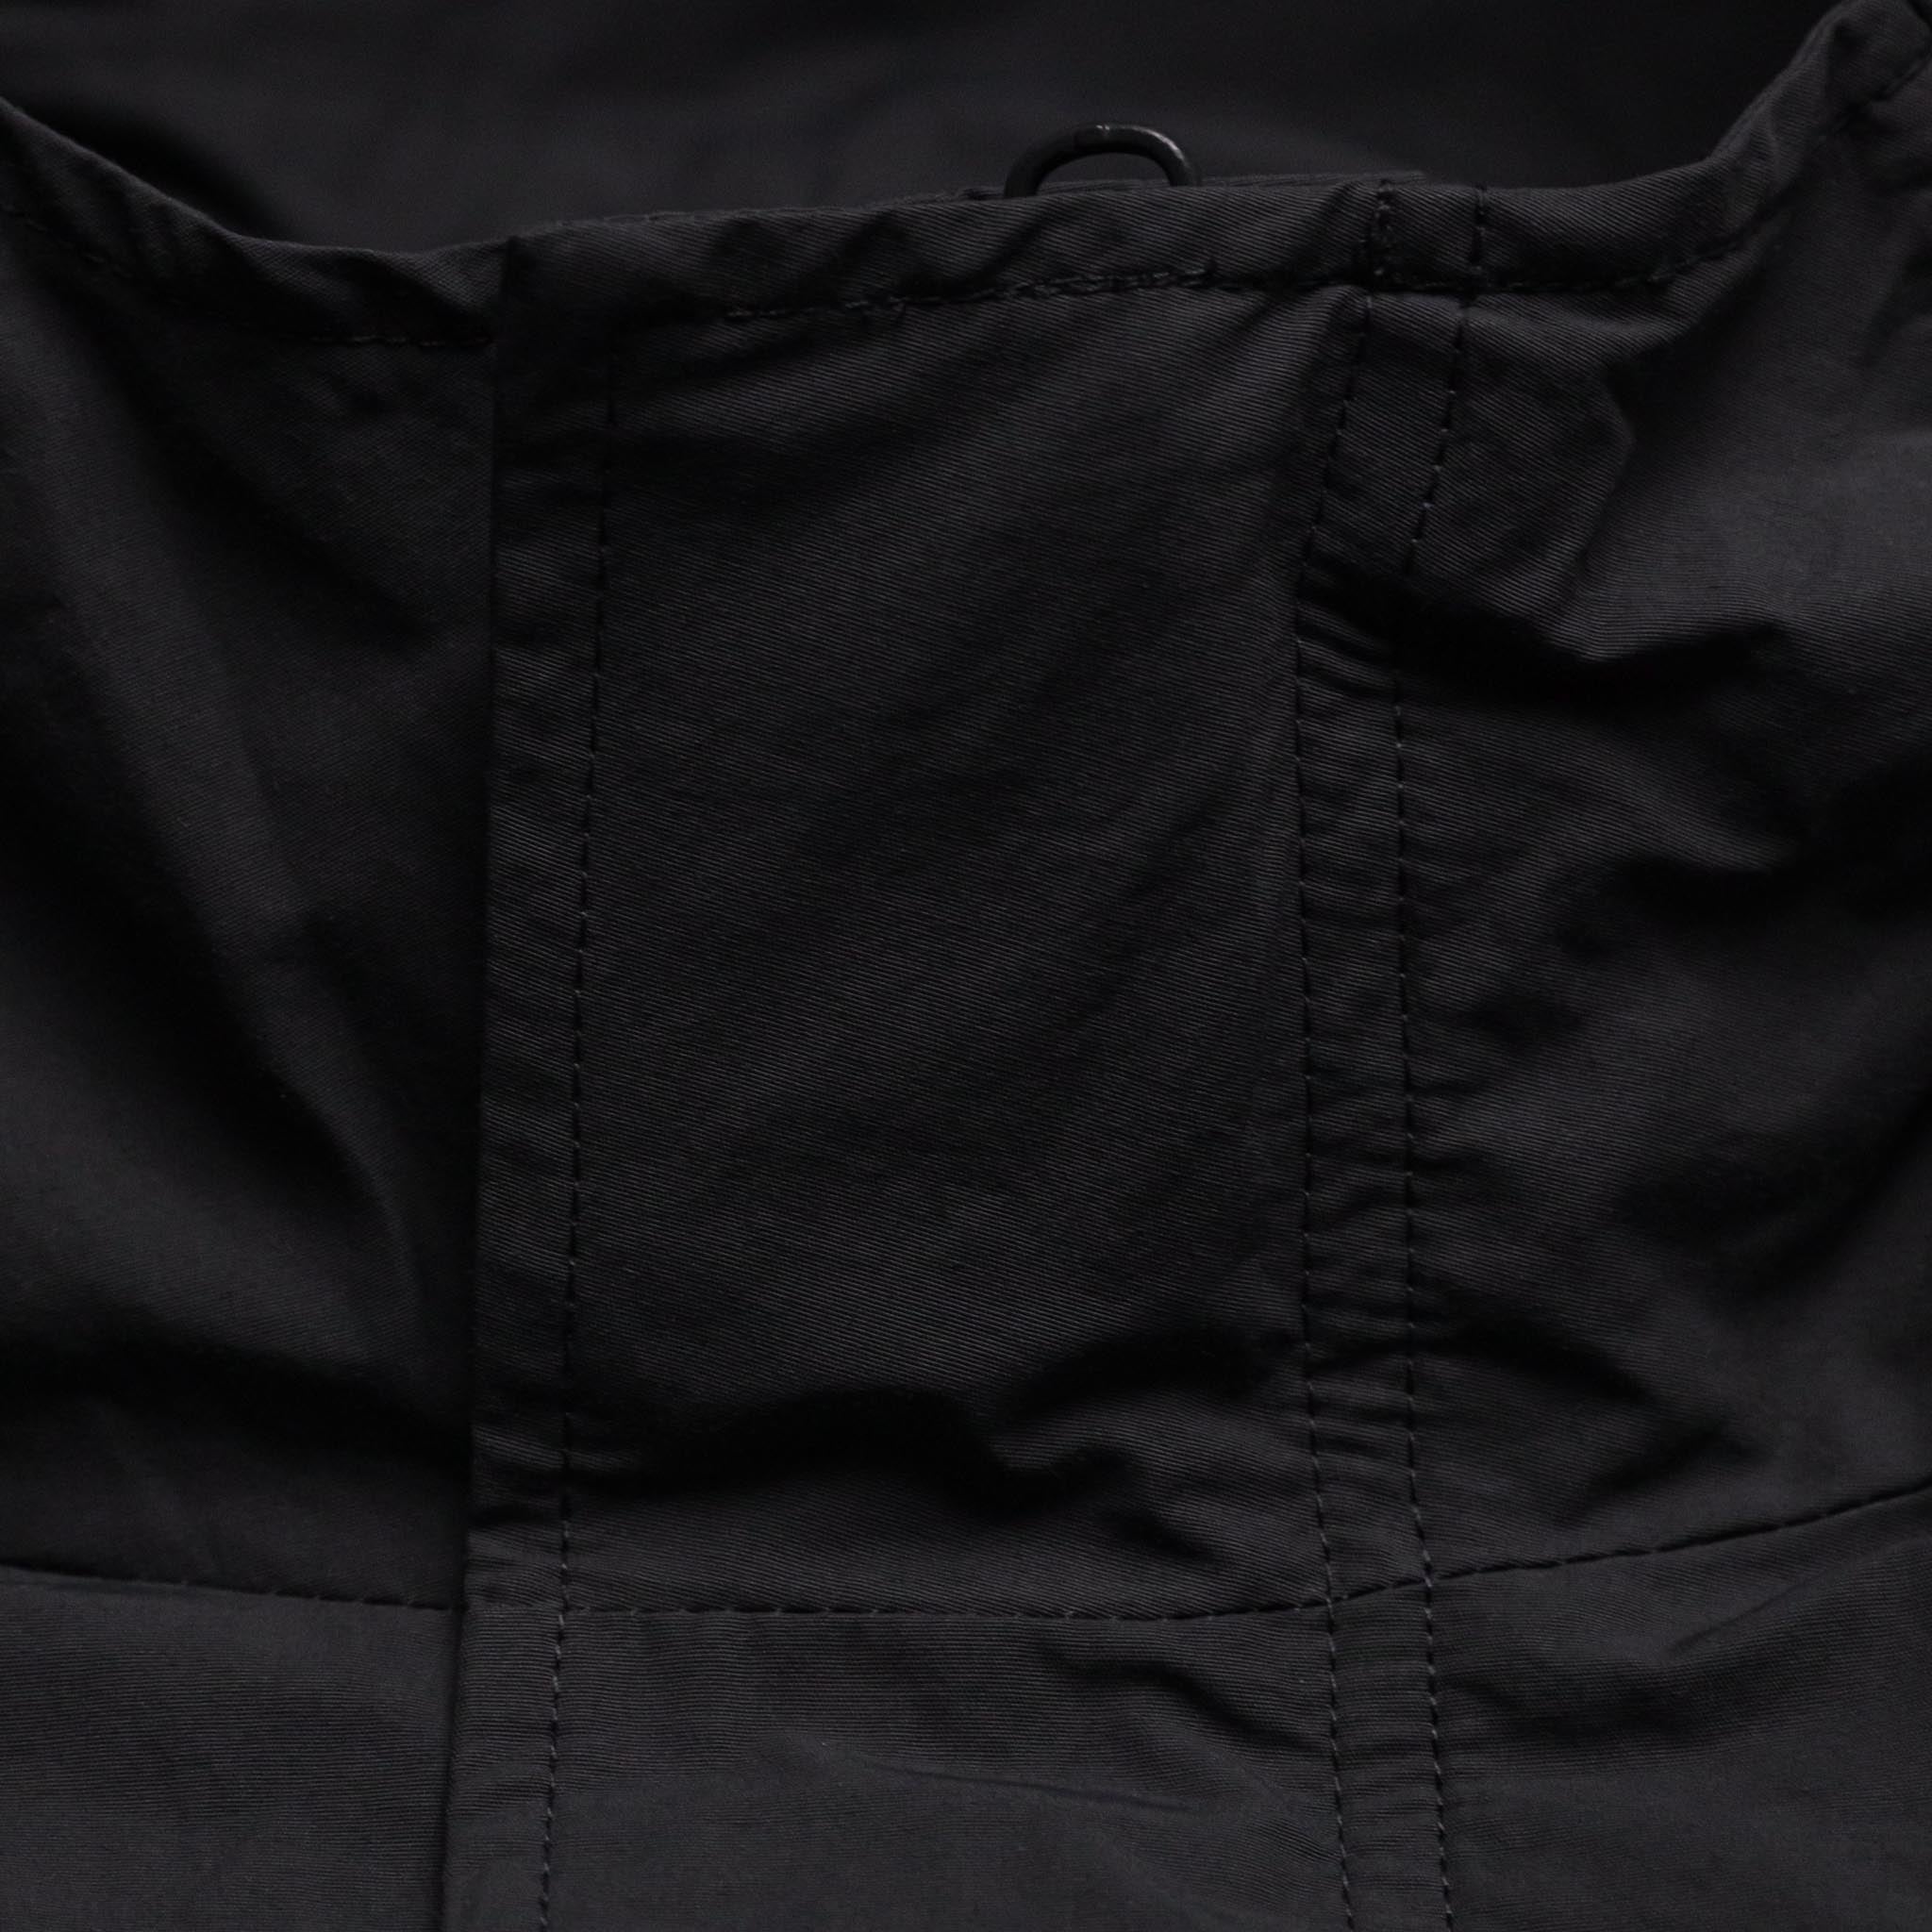 HOMME+ Cargo Pocket Trench Coat Charcoal